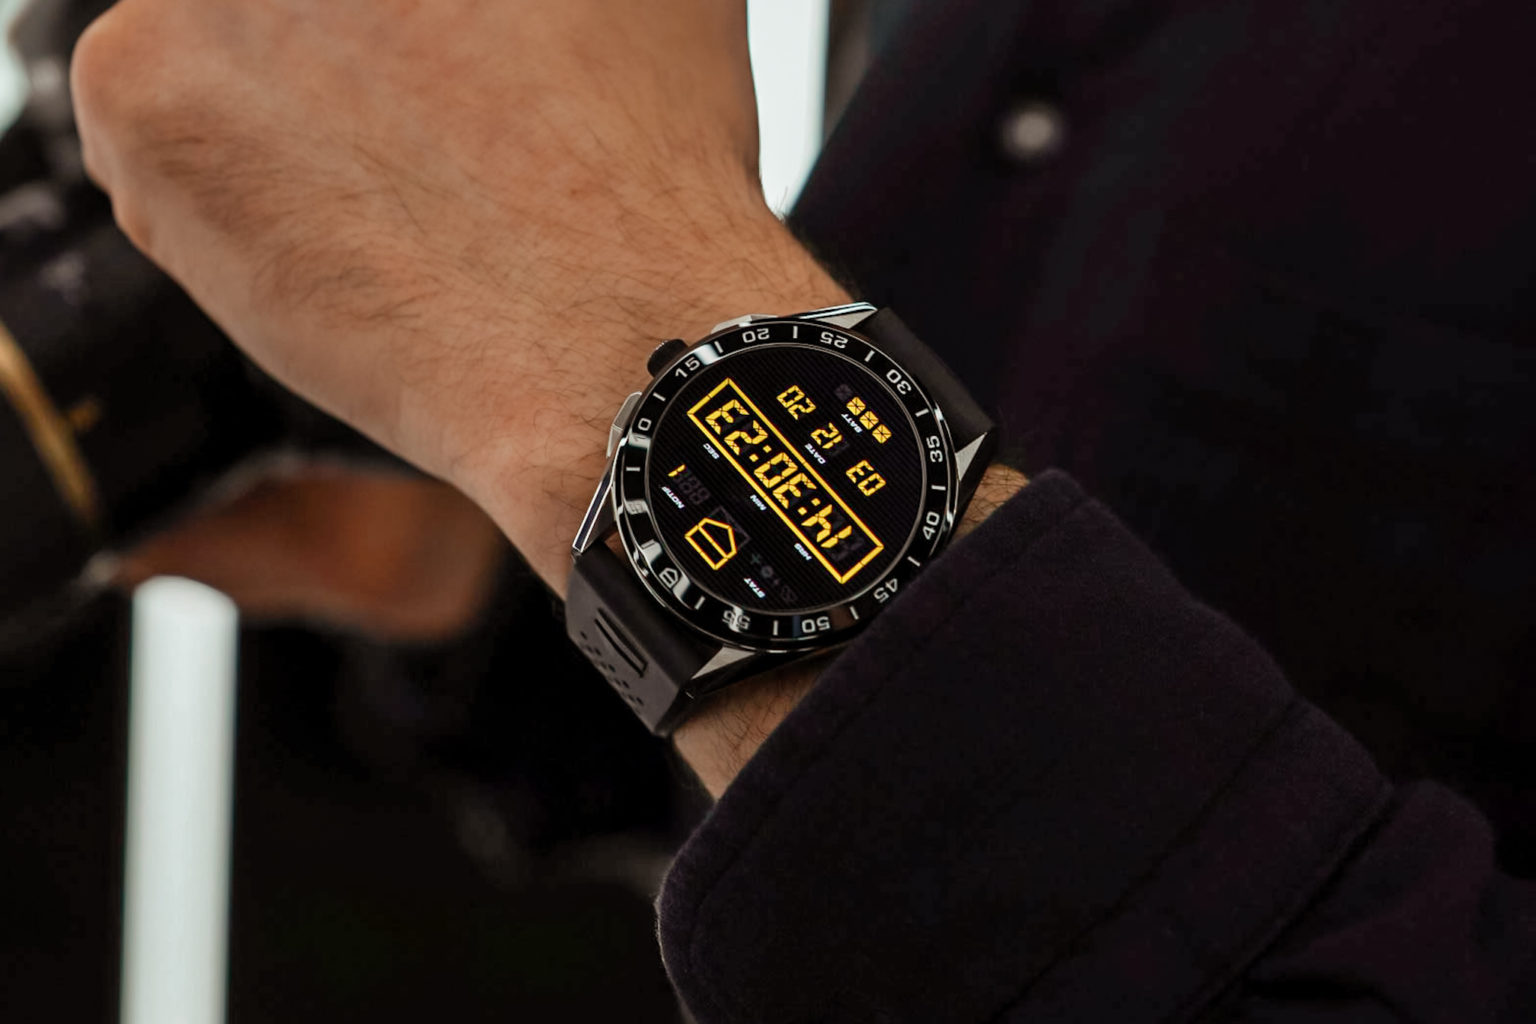 smartwatch thể thao đo nhịp tim tag heuer connected 2020